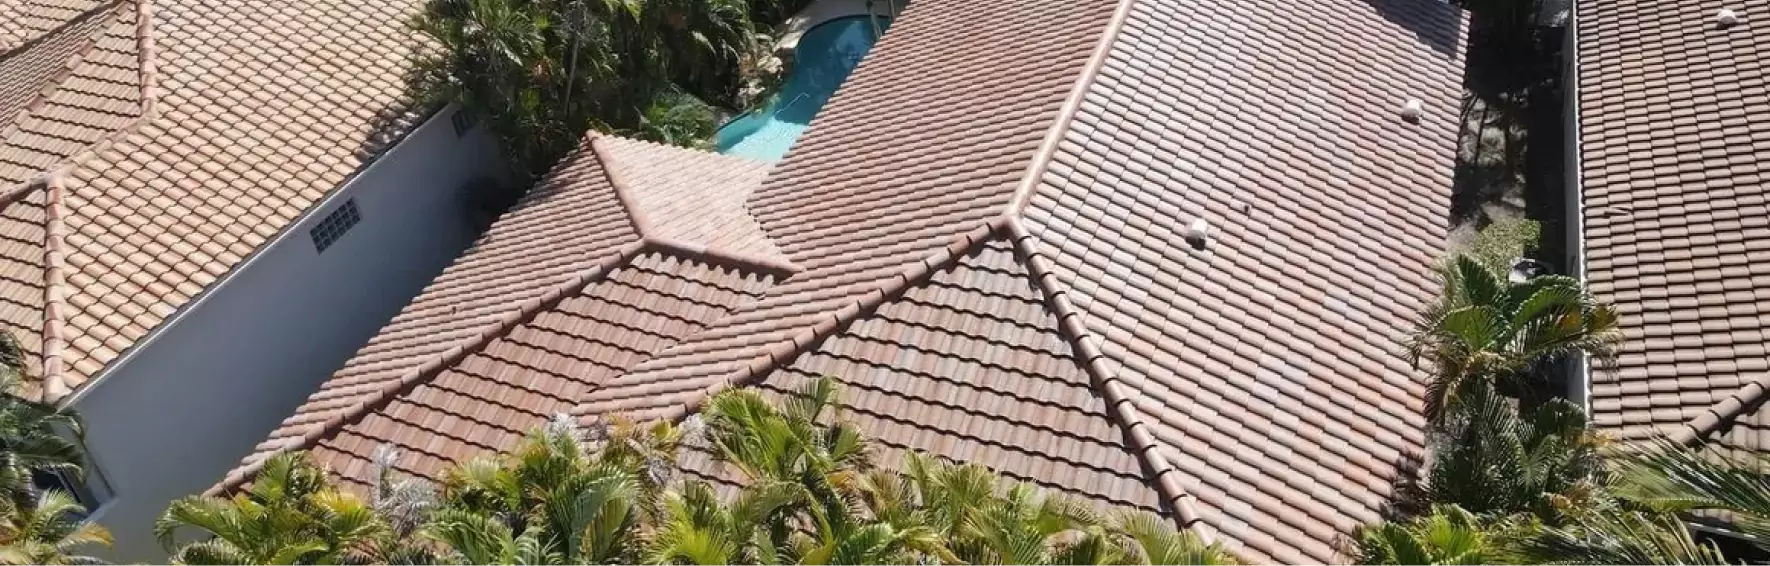 private house roof in hollywood